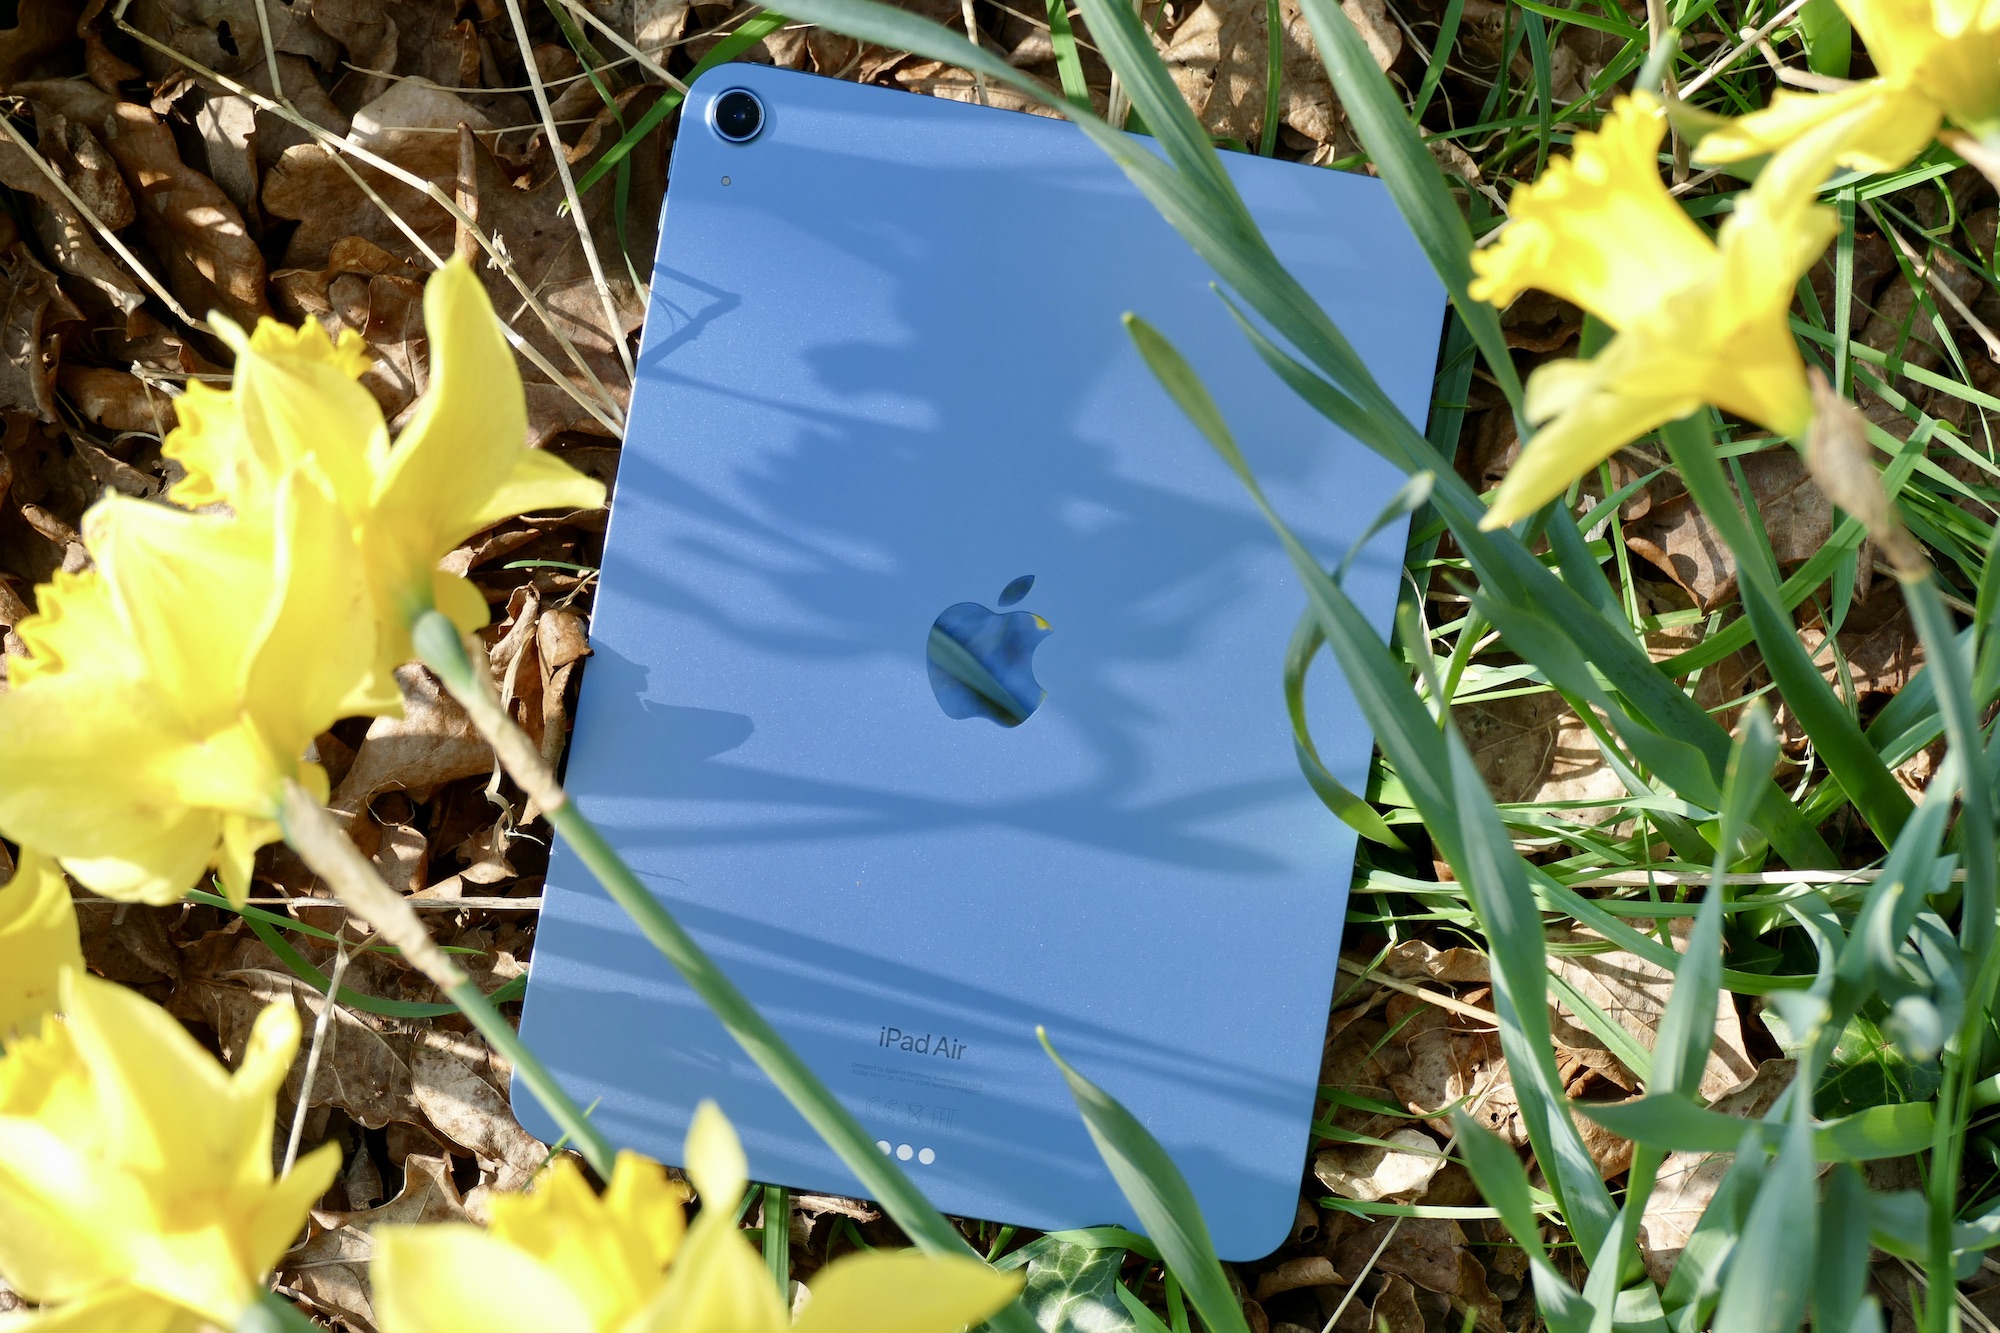 Apple iPad mini (6th Generation) Review: Fresh Design, More Power, and 5G